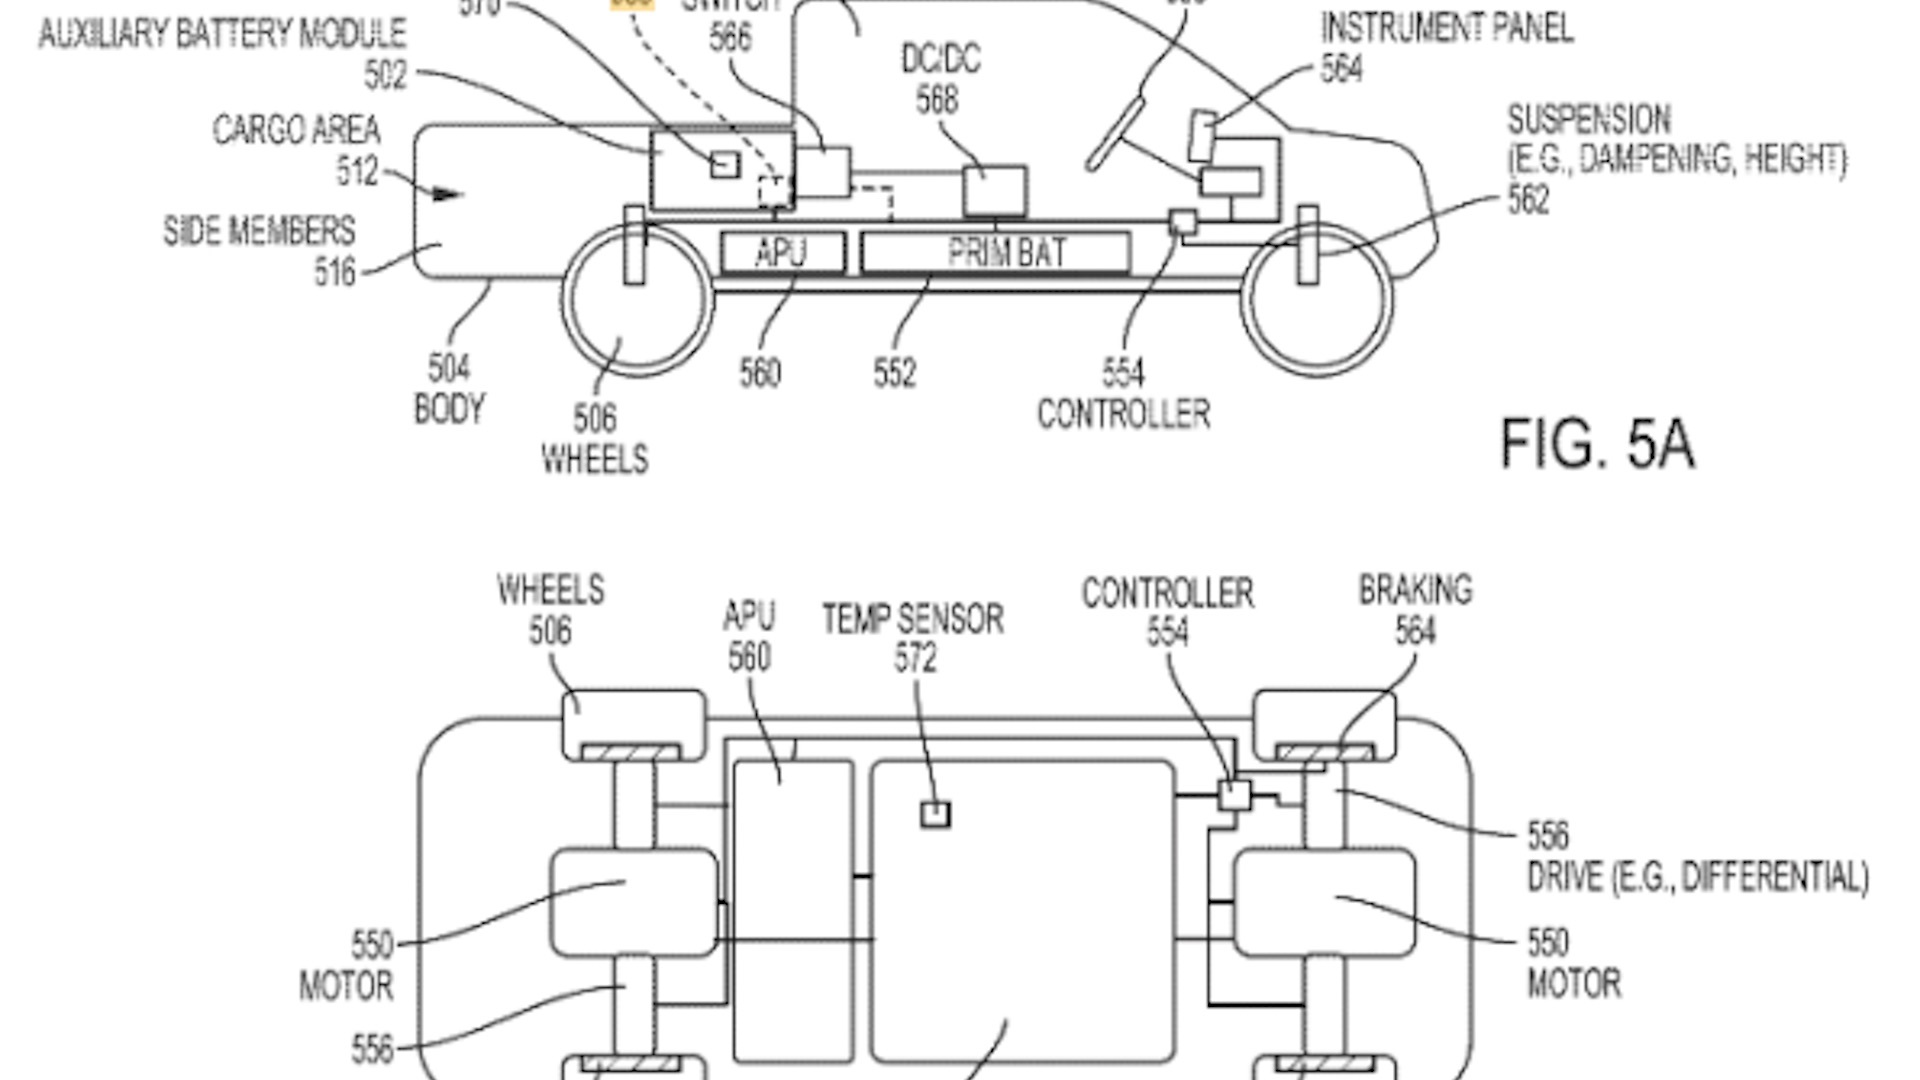 Rivian auxiliary battery pack technology patent